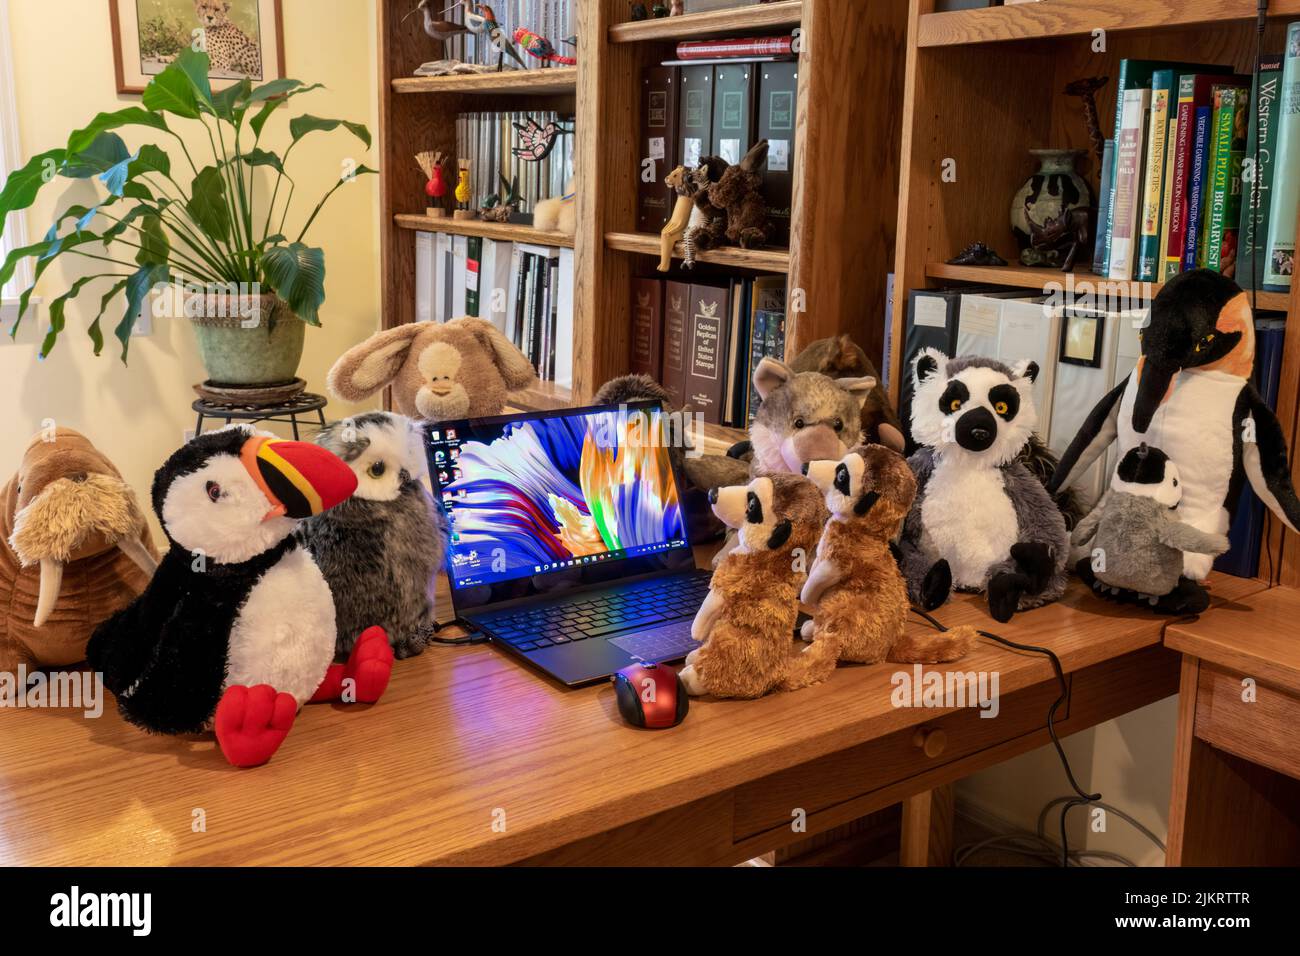 Issaquah, Washington, USA.  Laptop PC surrounded by a collection of stuffed animals, with two meerkats gazing at the PC. Stock Photo